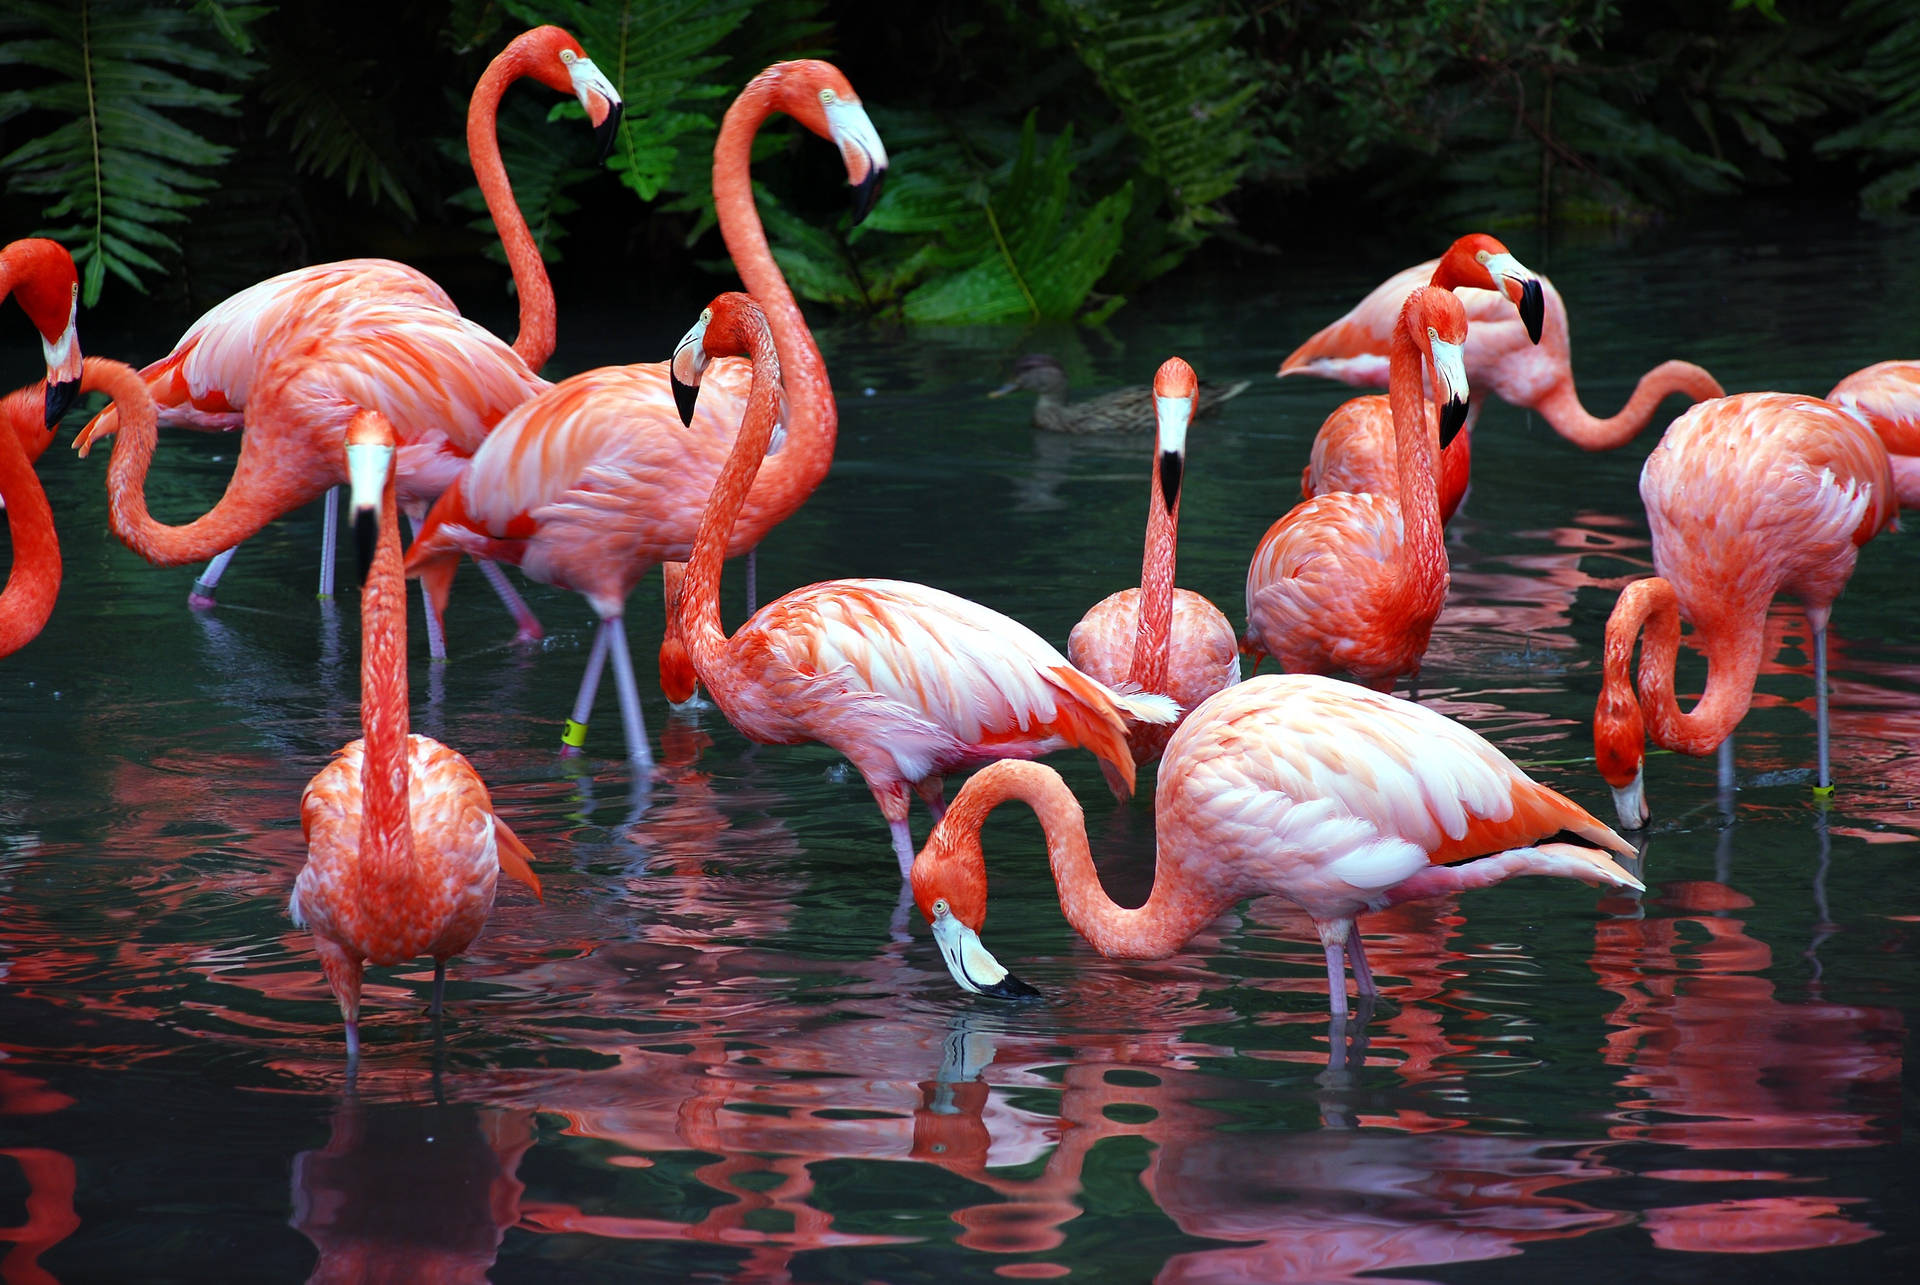 A flock of flamingoes bask in the sunlight of a tropical environment Wallpaper